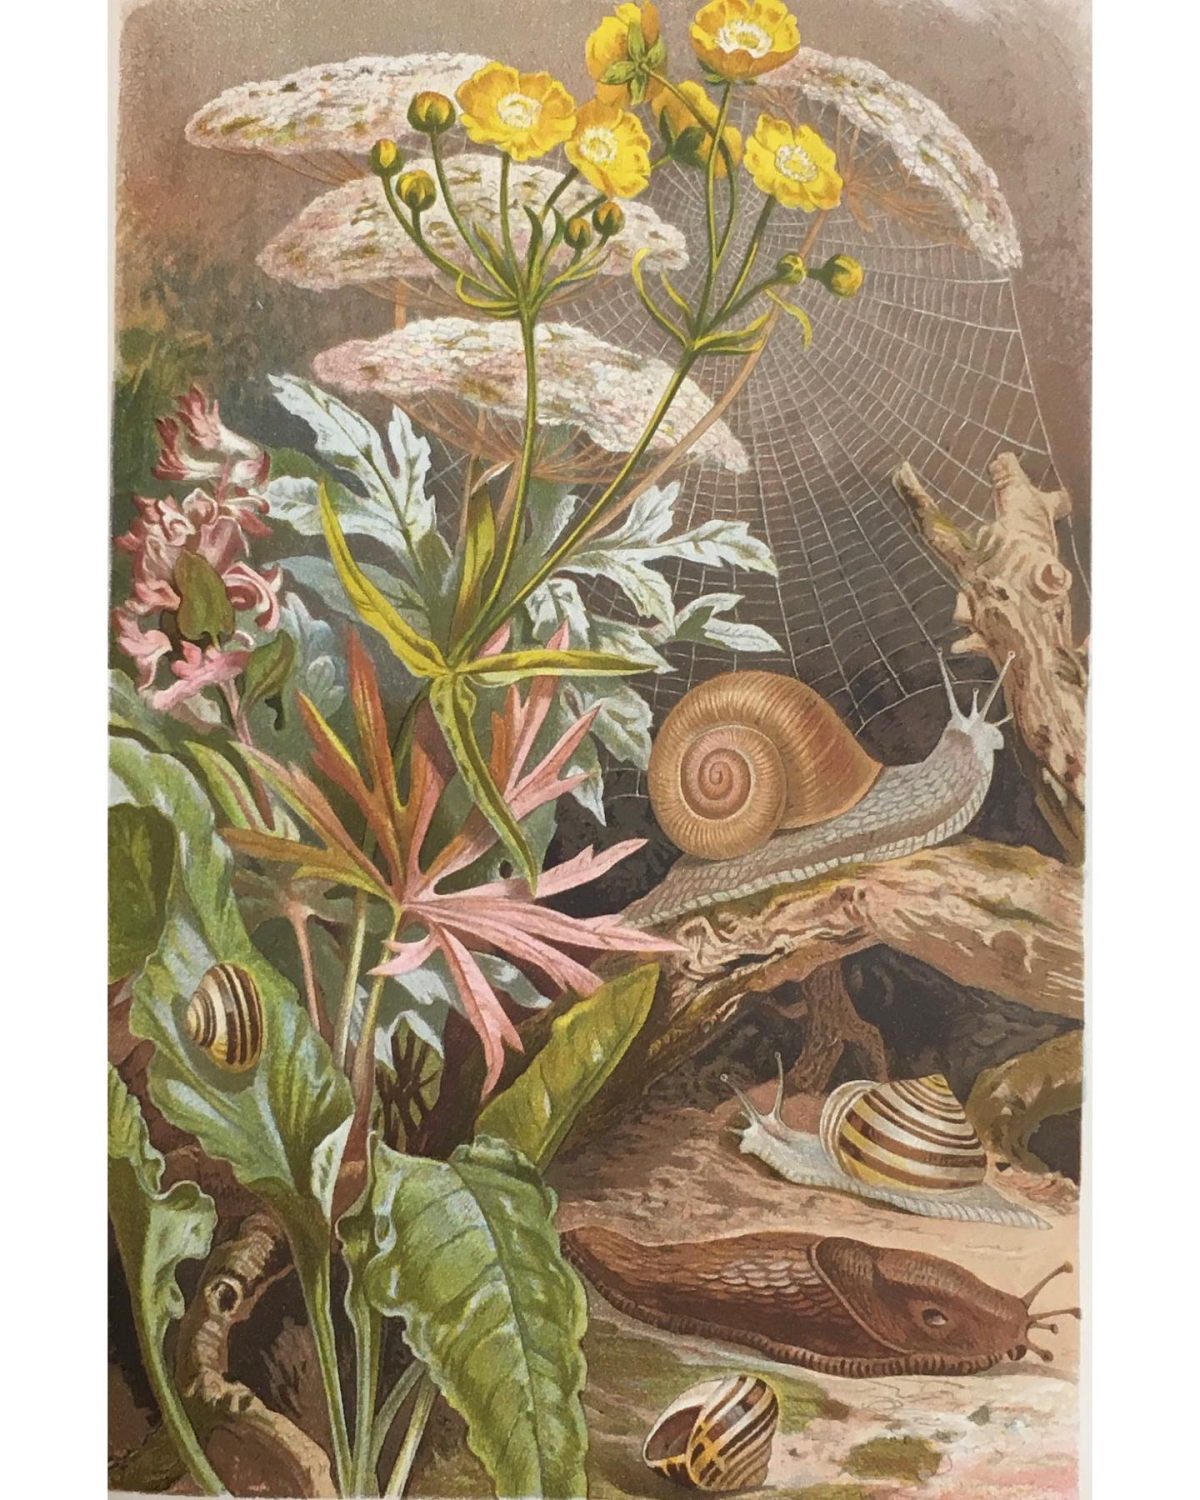 illustration of snails and slugs by alfred edmund brehm